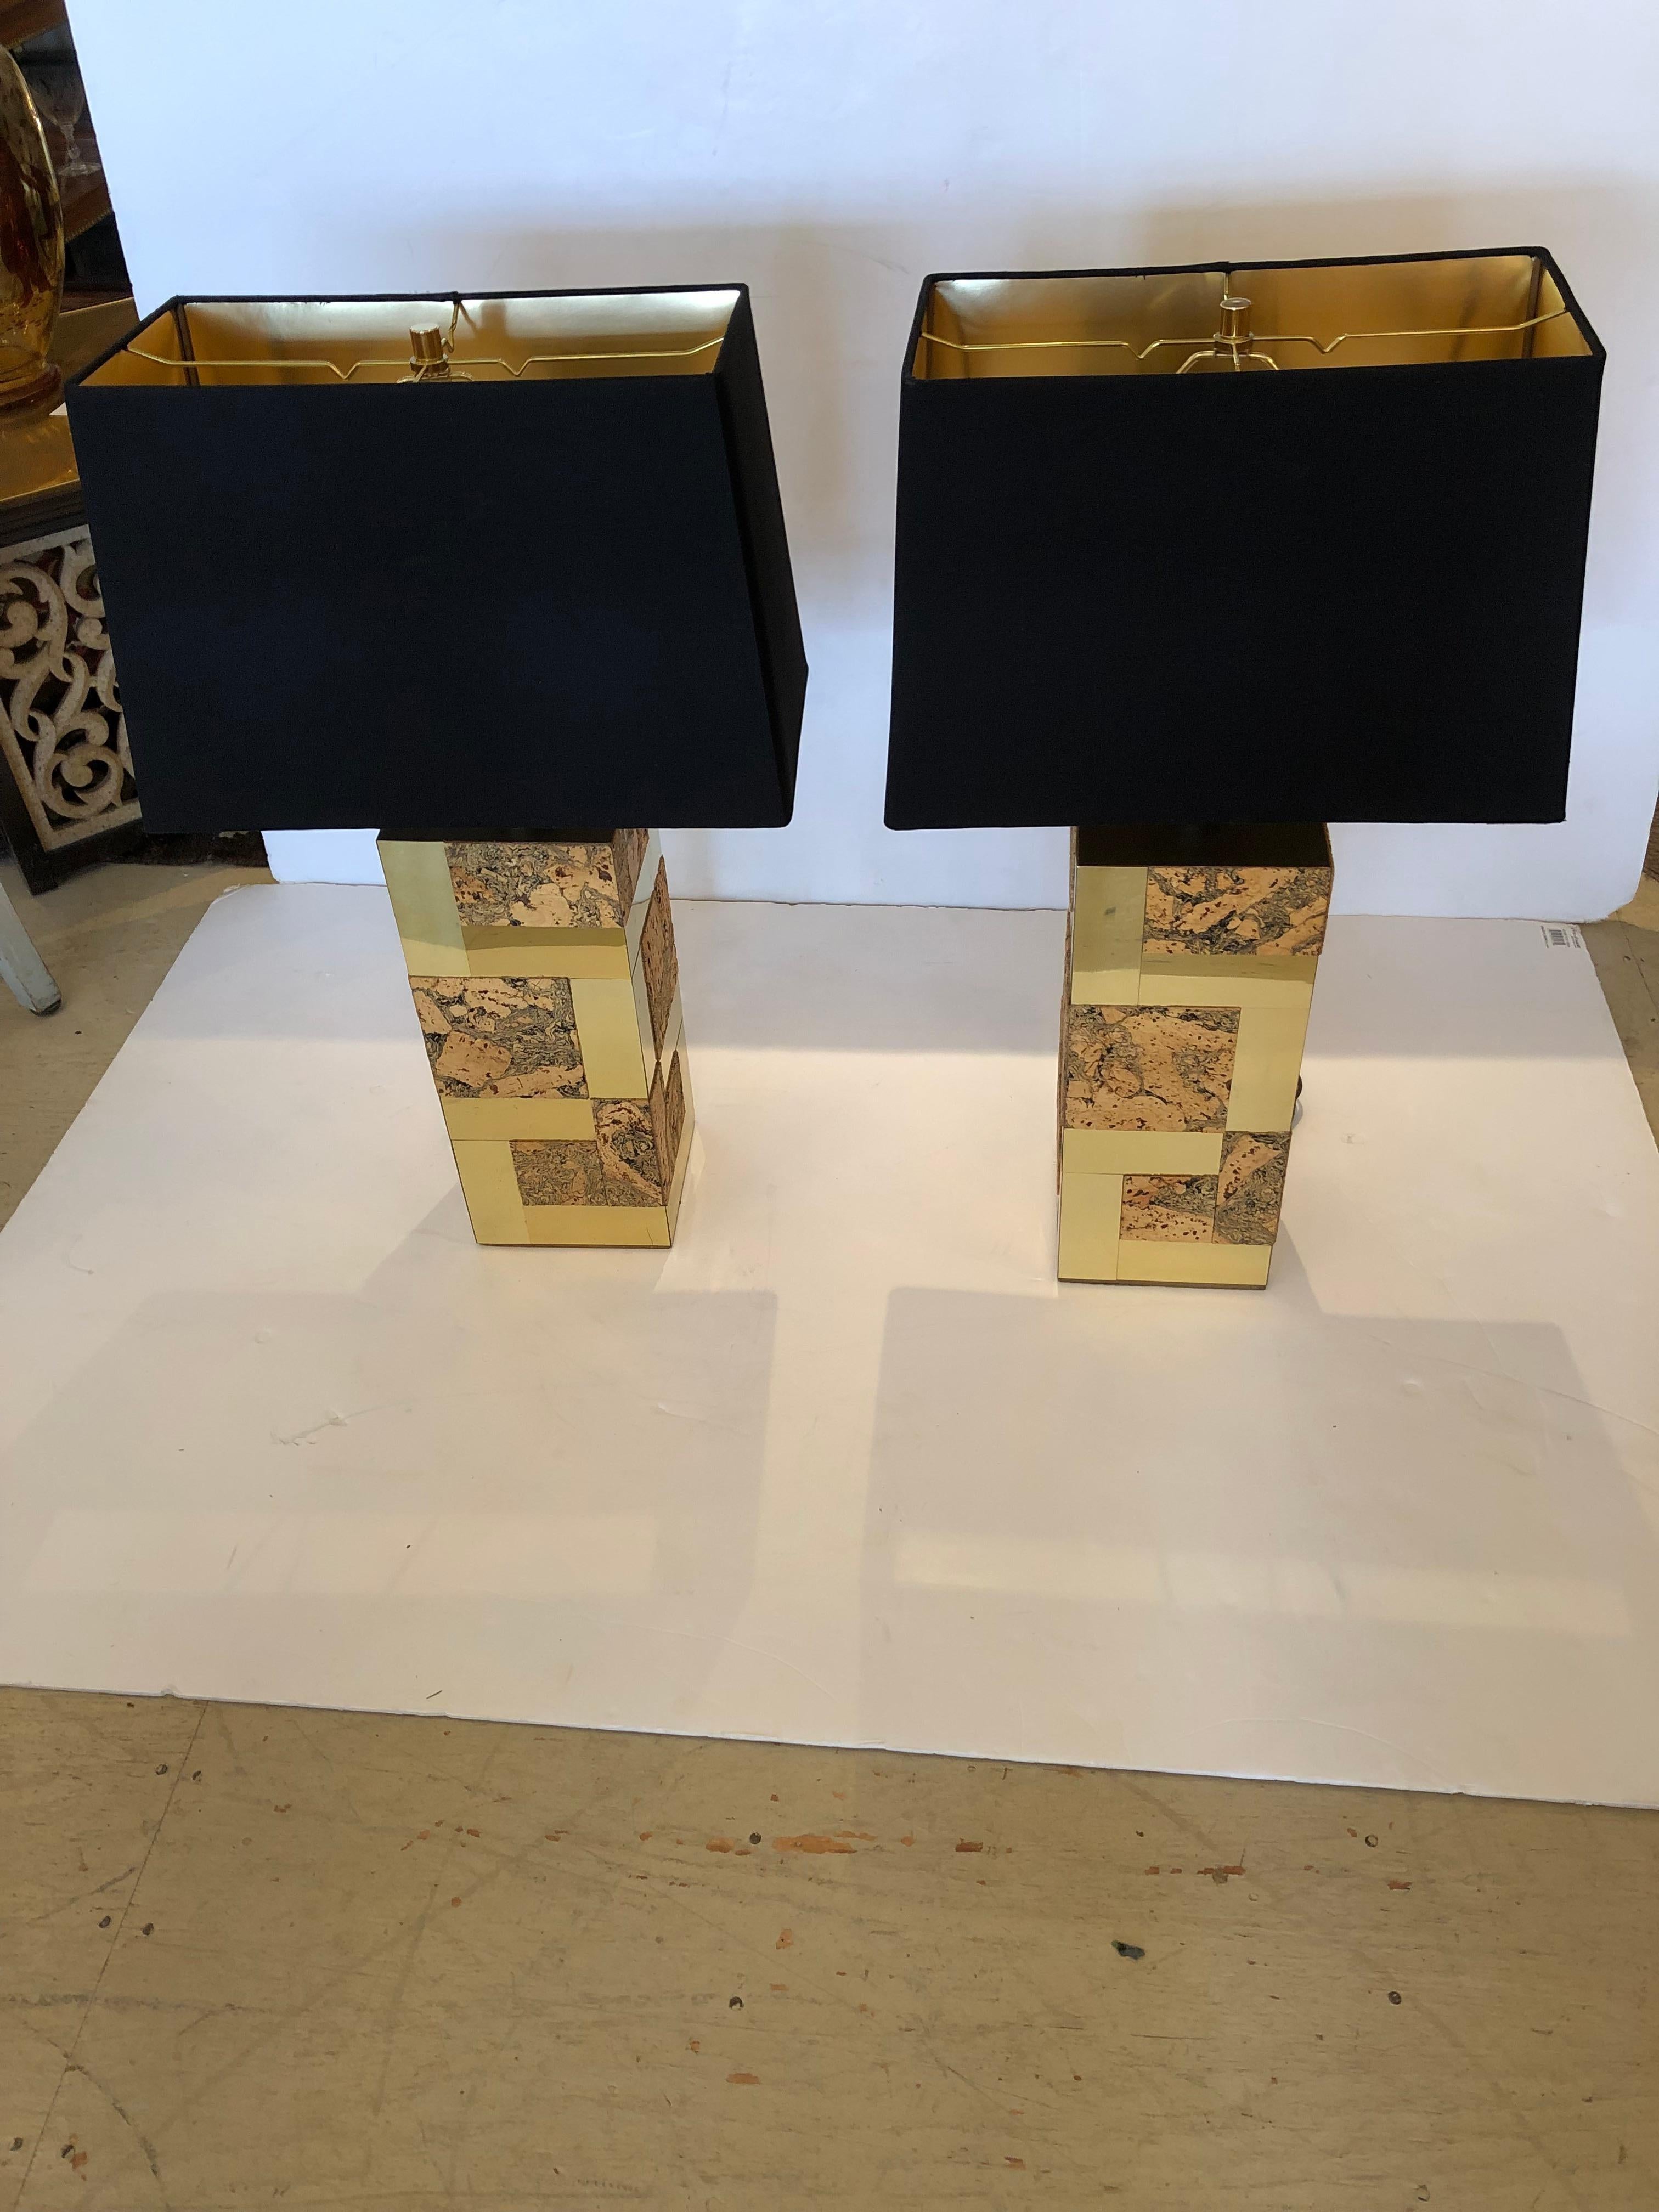 A rare and iconic pair of brass and cork cityscape elongated cube table lamps attributed to Paul Evans. We believe them to be authentic but no markings.
Chunky and fabulous! Brand new top of the line black shades with interior gold metallic